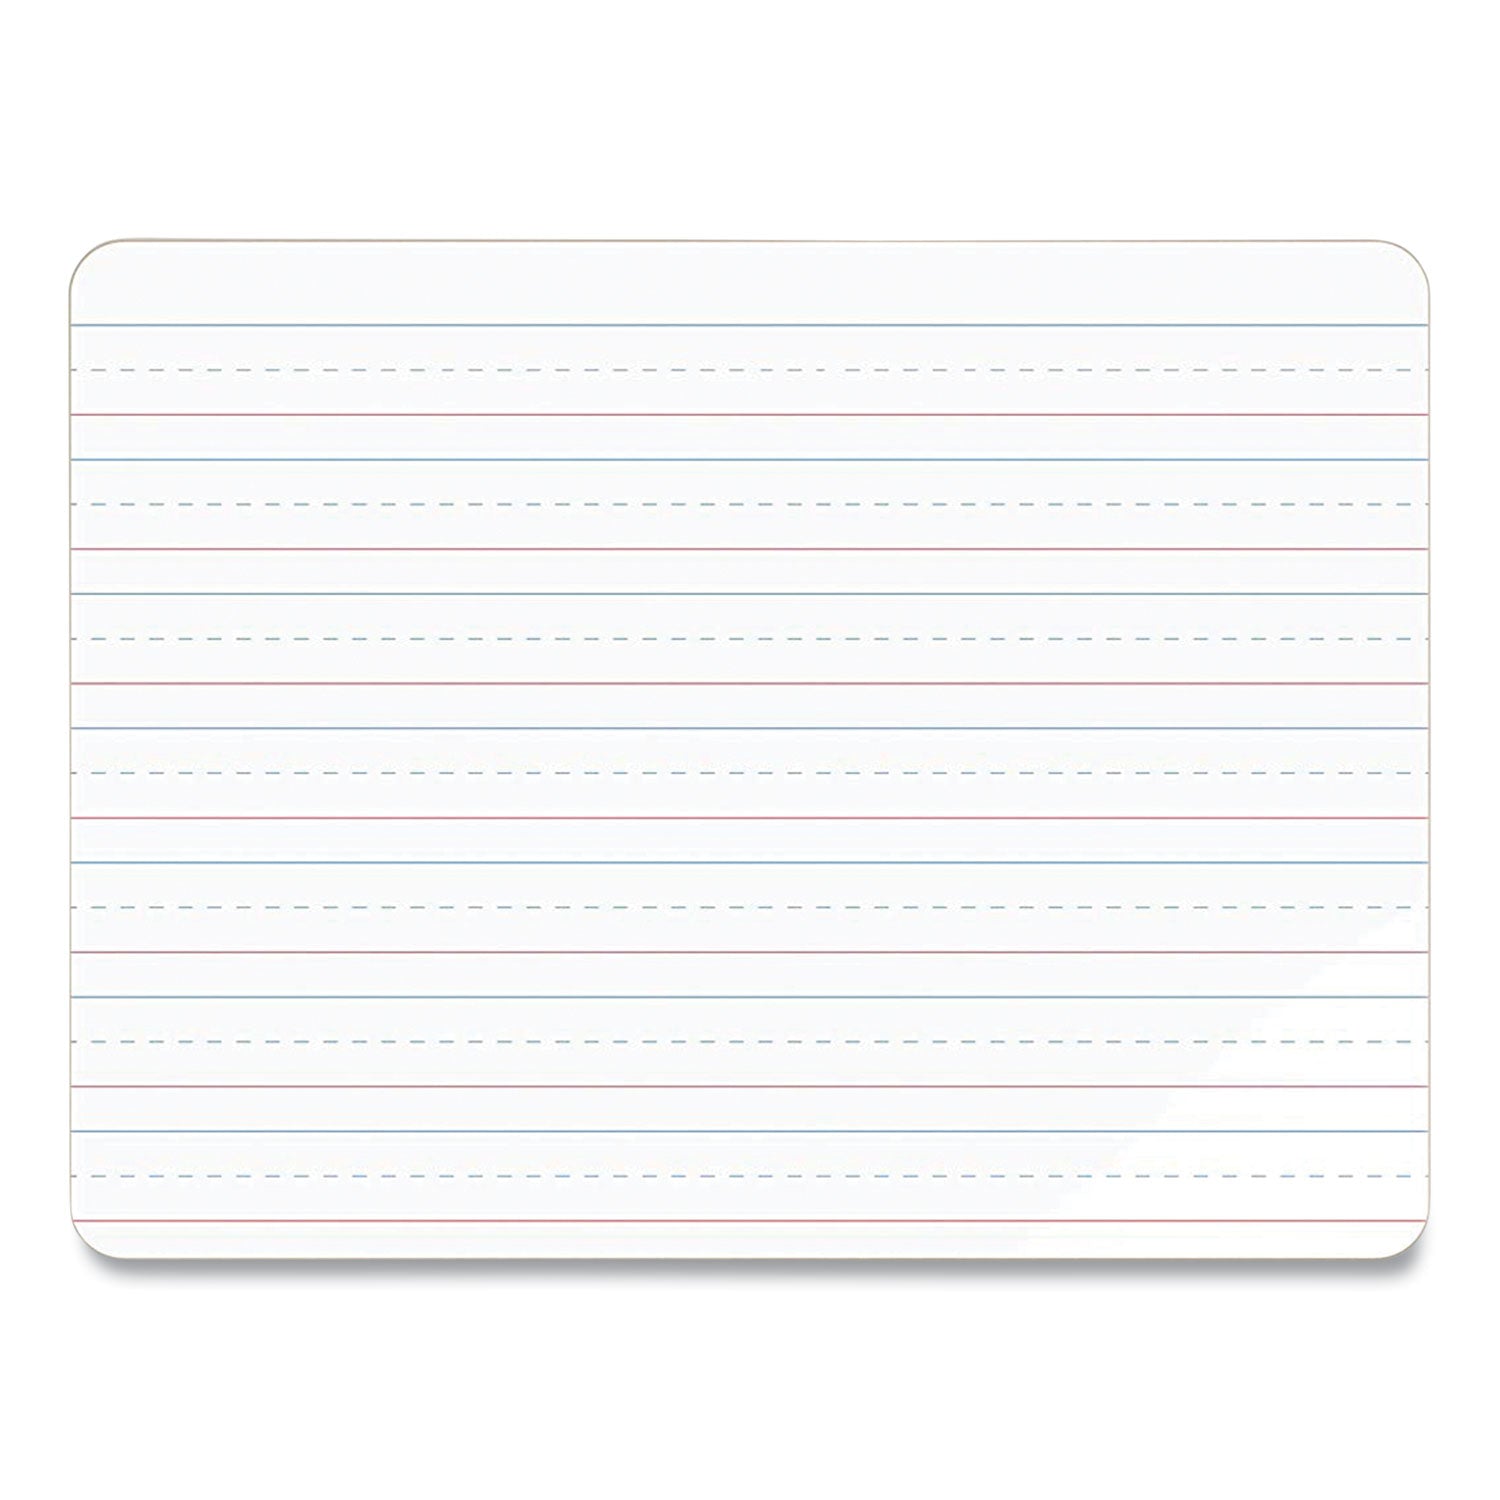 double-sided-dry-erase-lap-board-12-x-9-white-surface-10-pack_ubr483u0001 - 1